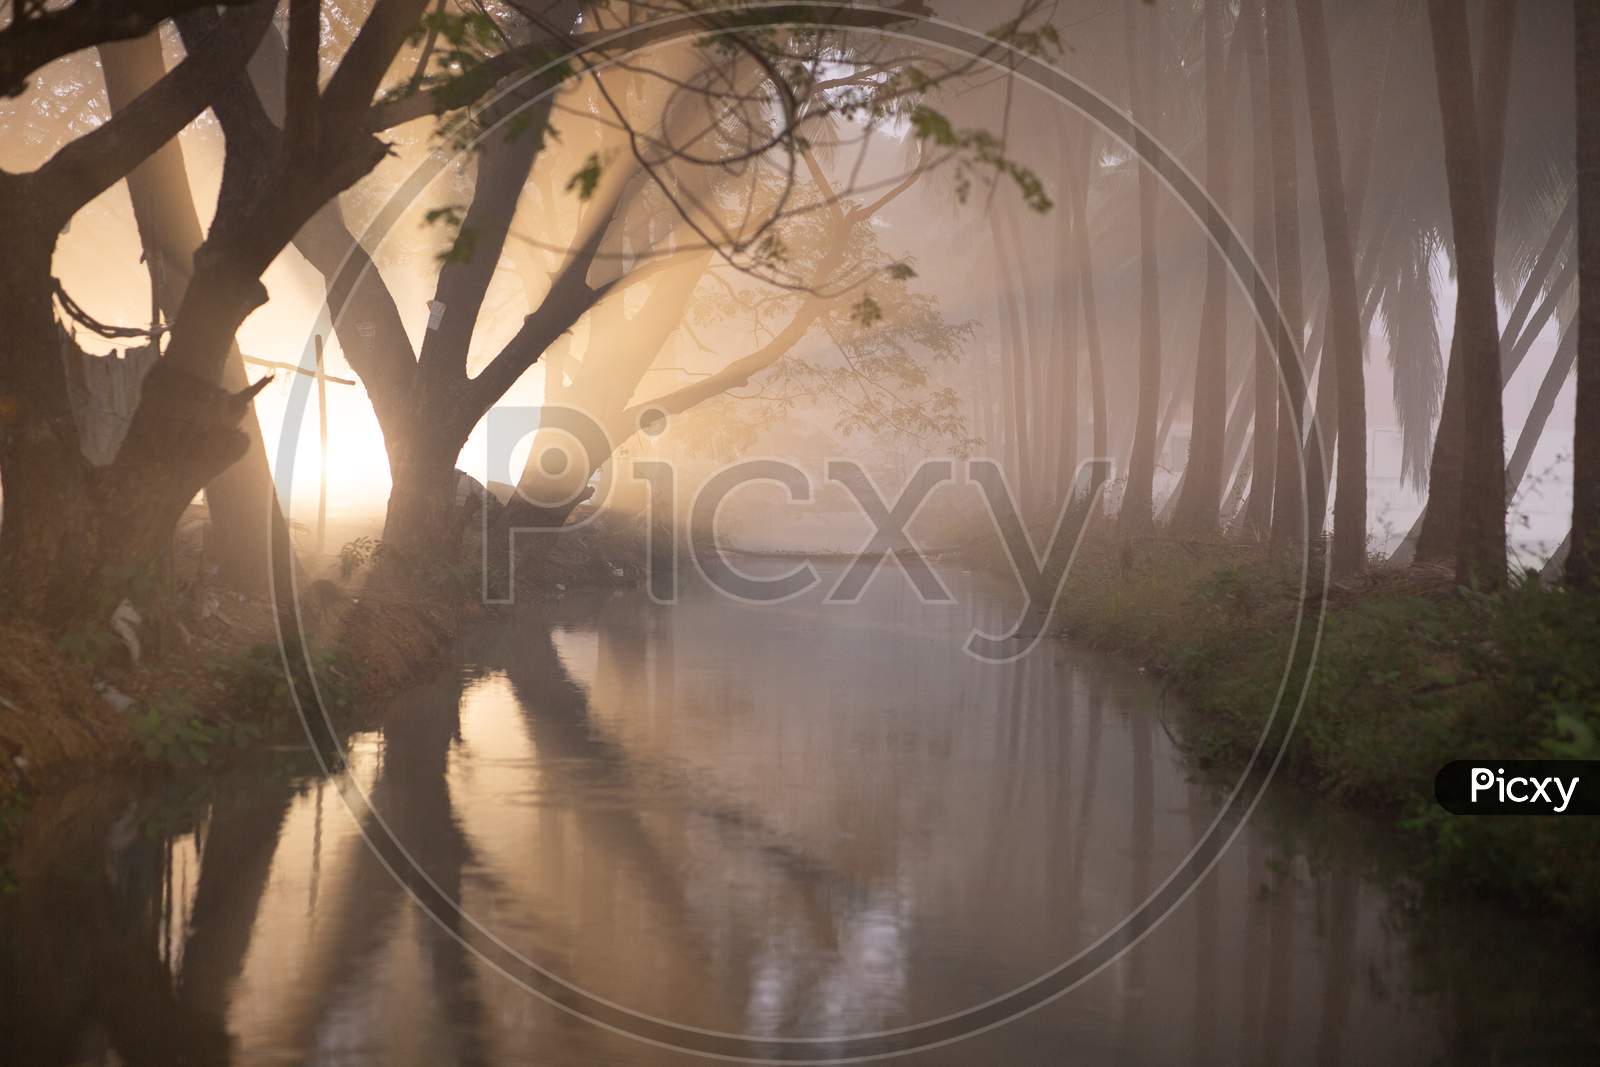 Canopy Of Trees With  Reflection  On Water Surface On an Winter Morning In Rural Village Outskirts